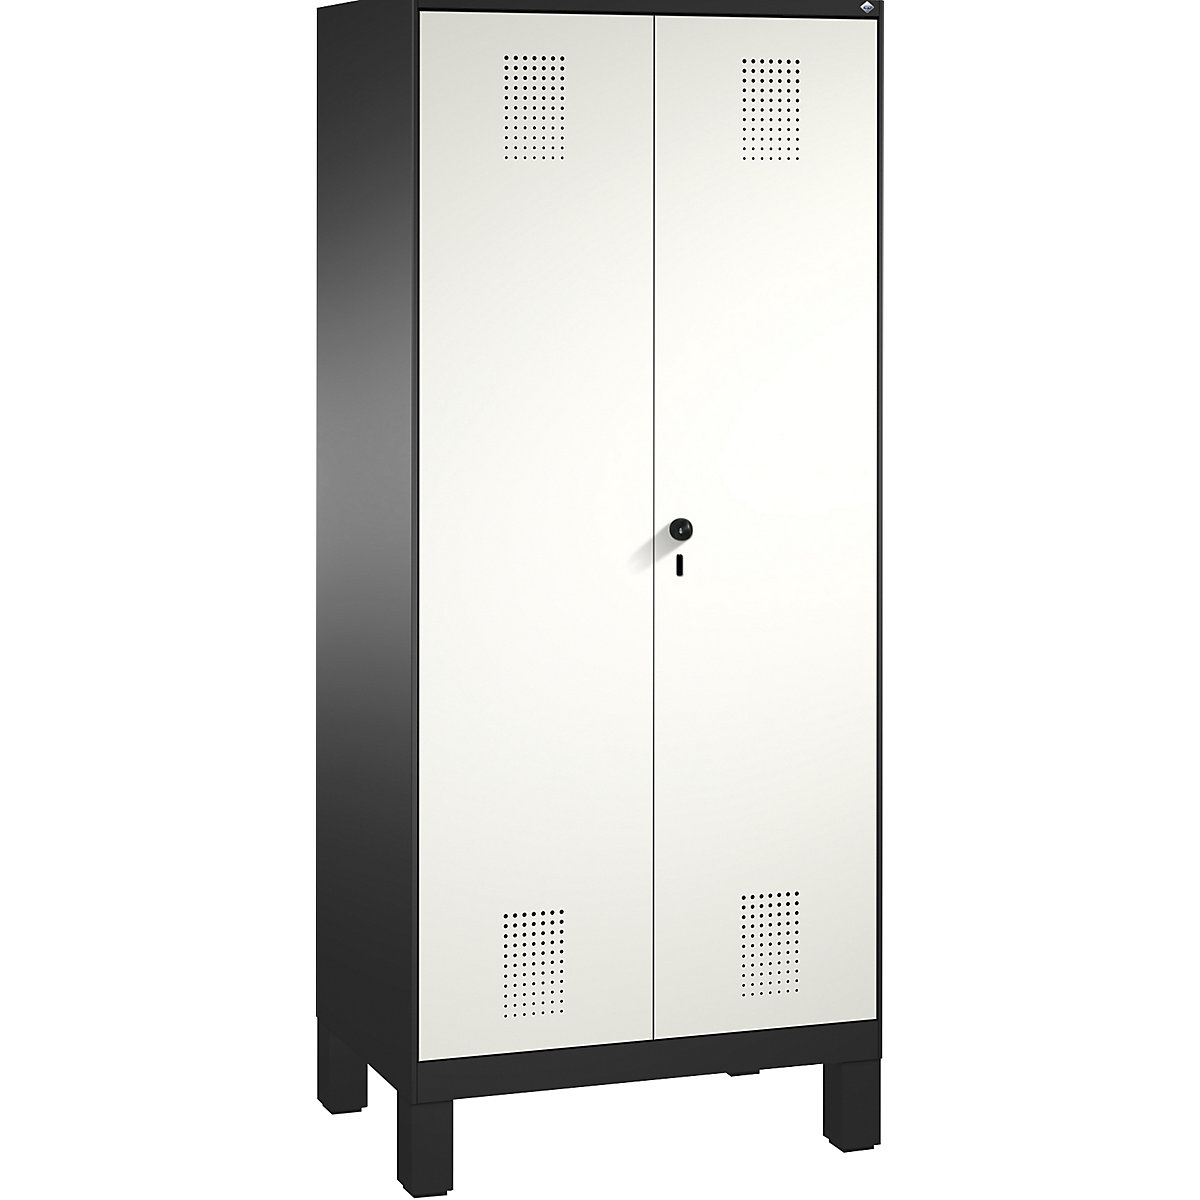 EVOLO storage cupboard, doors close in the middle, with feet – C+P, 2 compartments, 8 shelves, compartment width 400 mm, black grey / traffic white-16